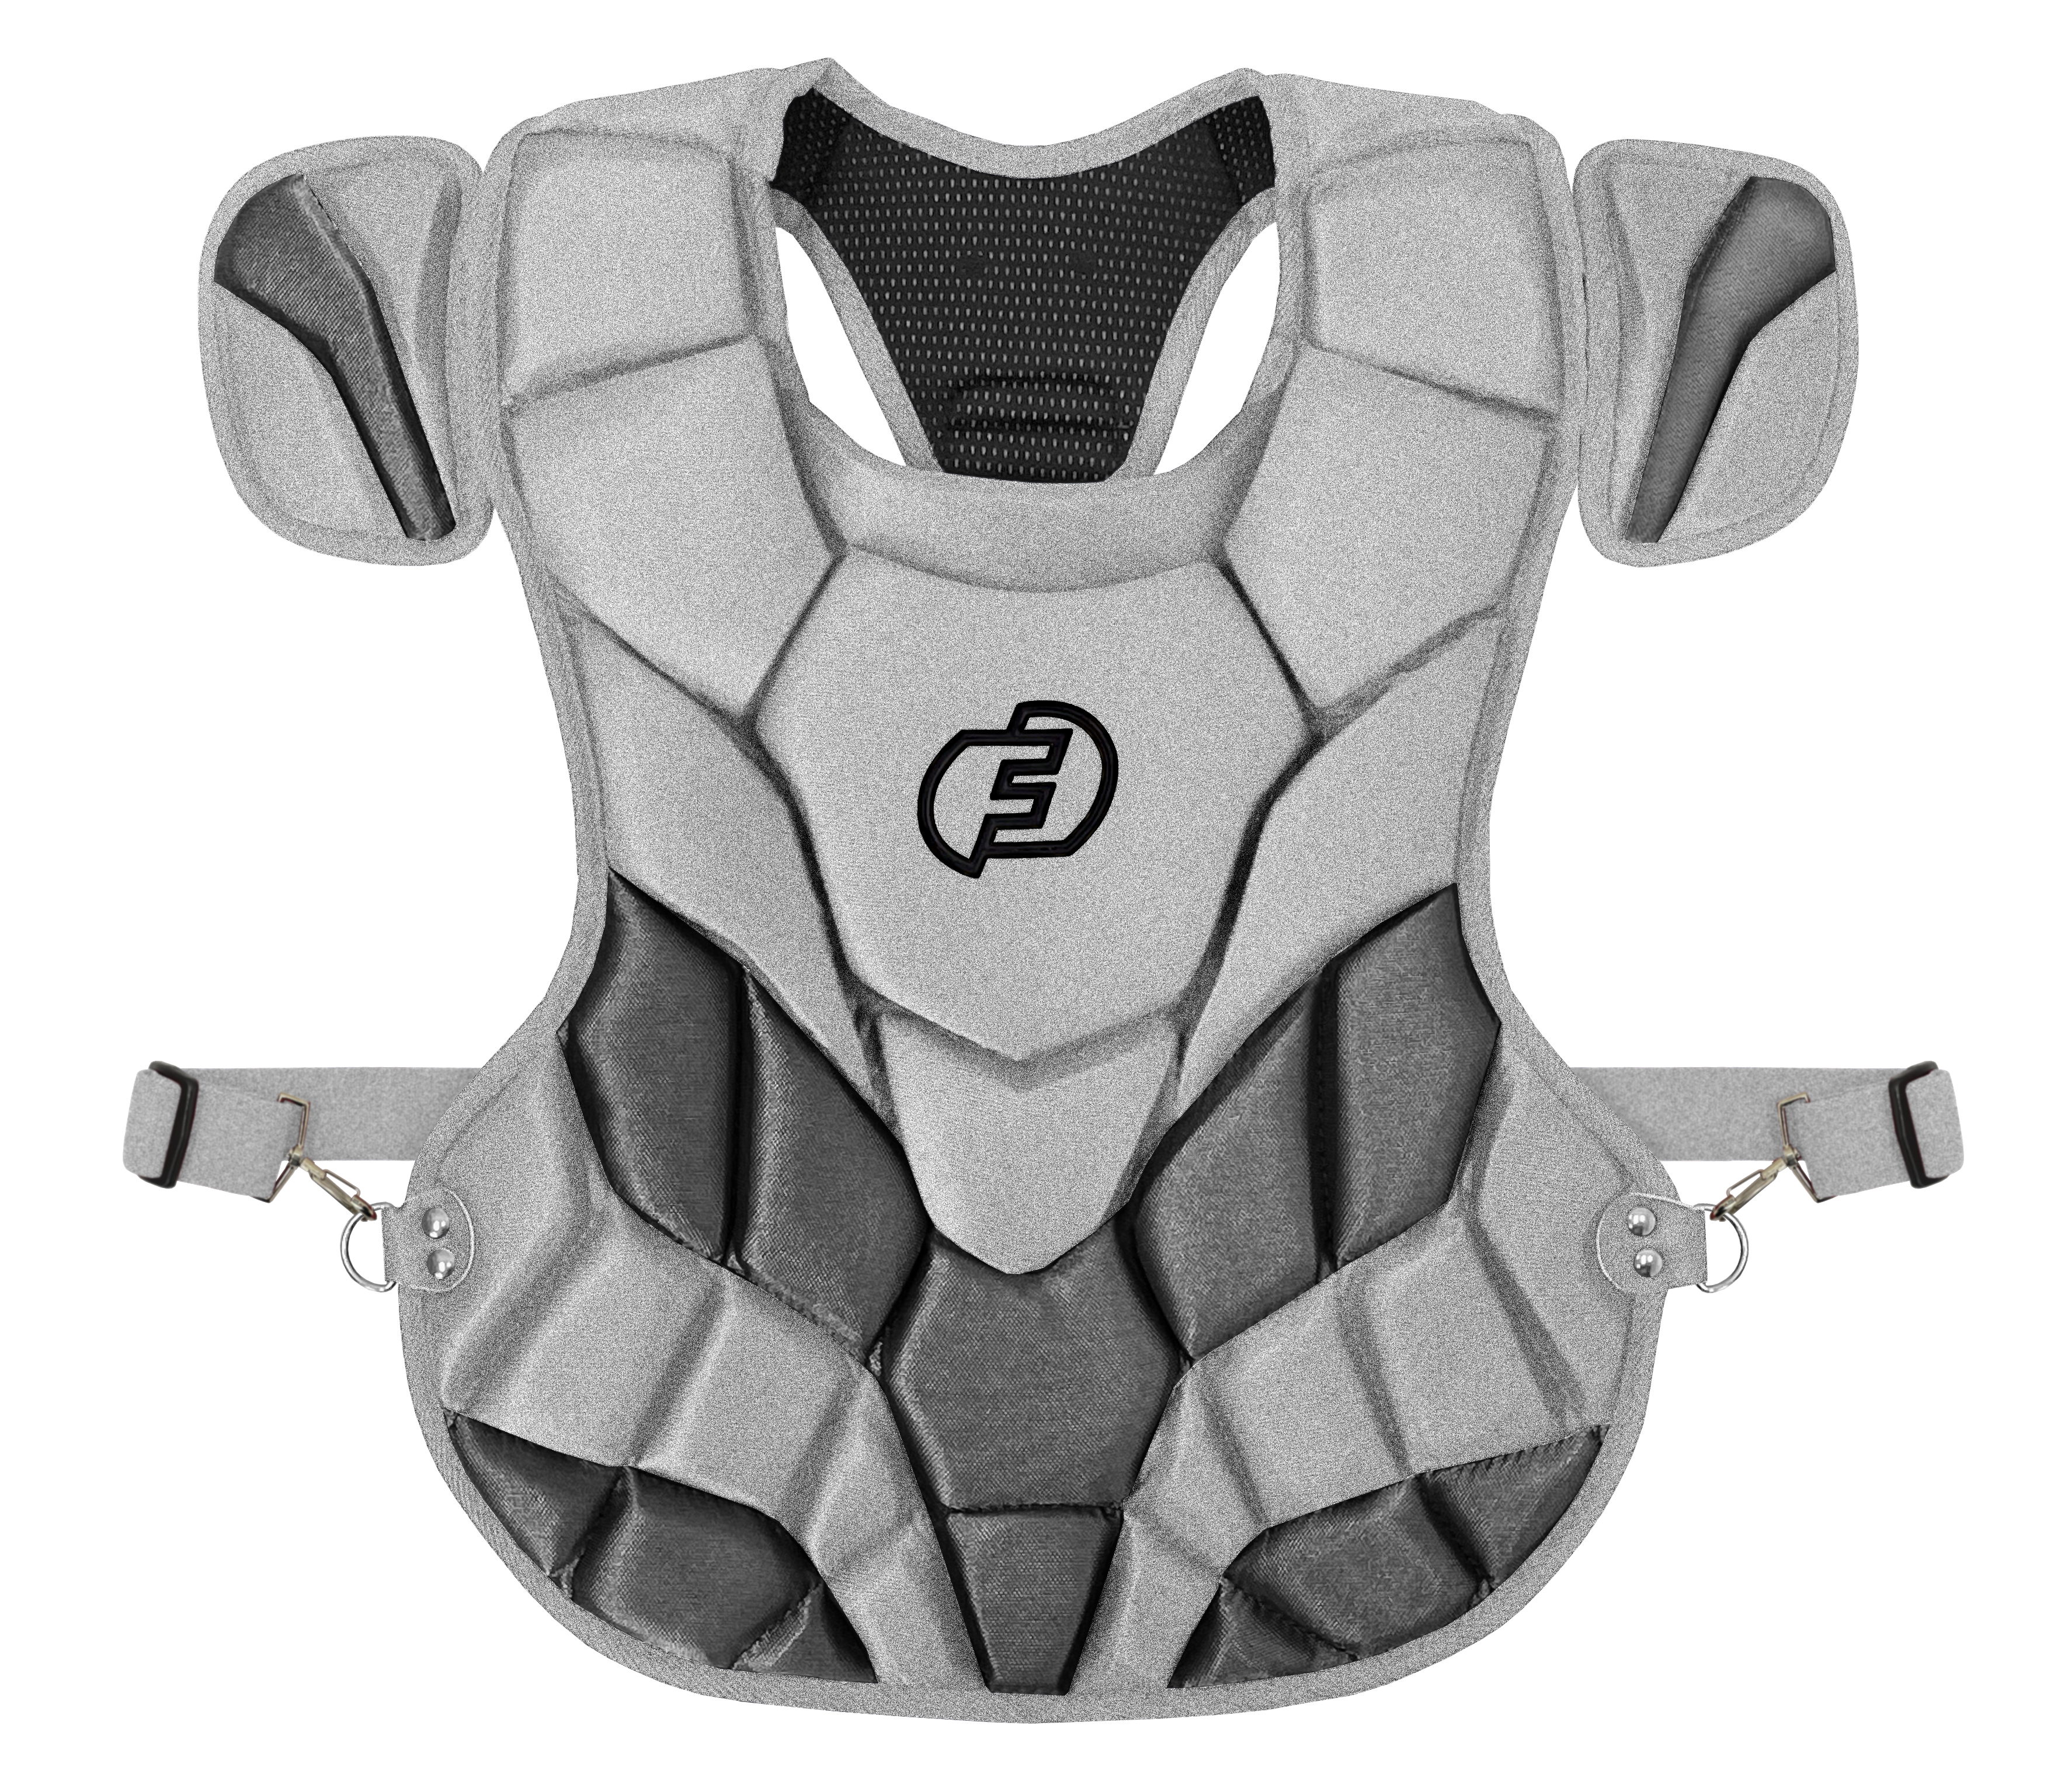 Force3 ADULT|CHEST PROTECTOR WITH DUPONT™ KEVLAR® | SEI CERTIFIED TO MEET NOCSAE STANDARD